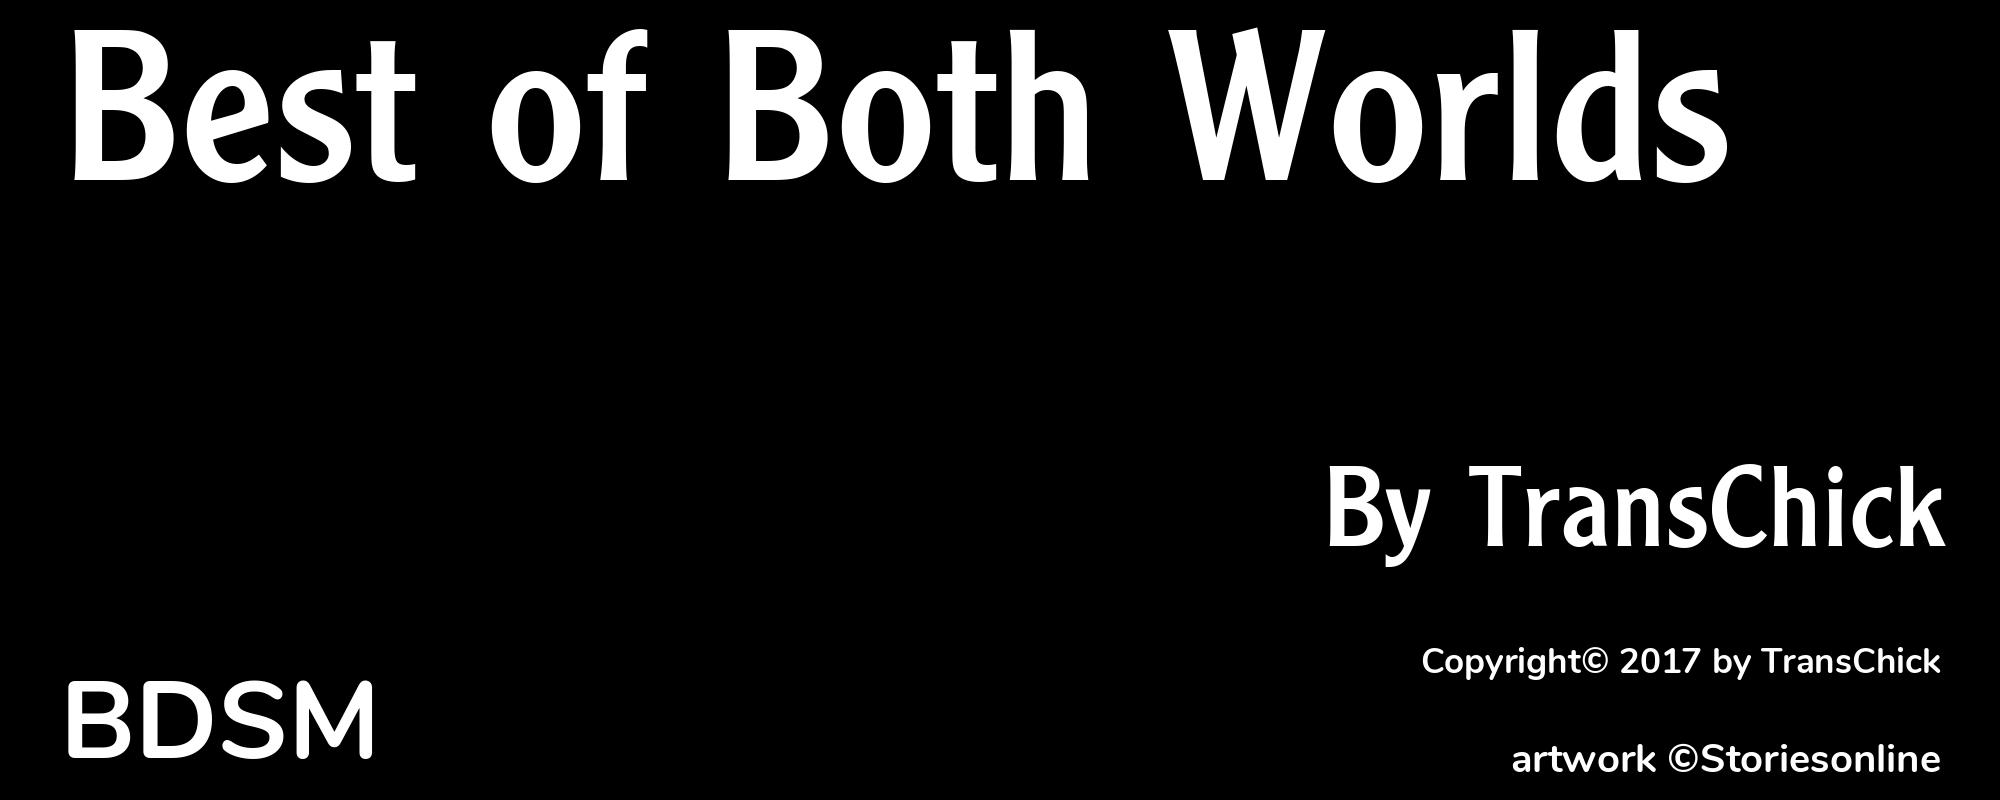 Best of Both Worlds - Cover